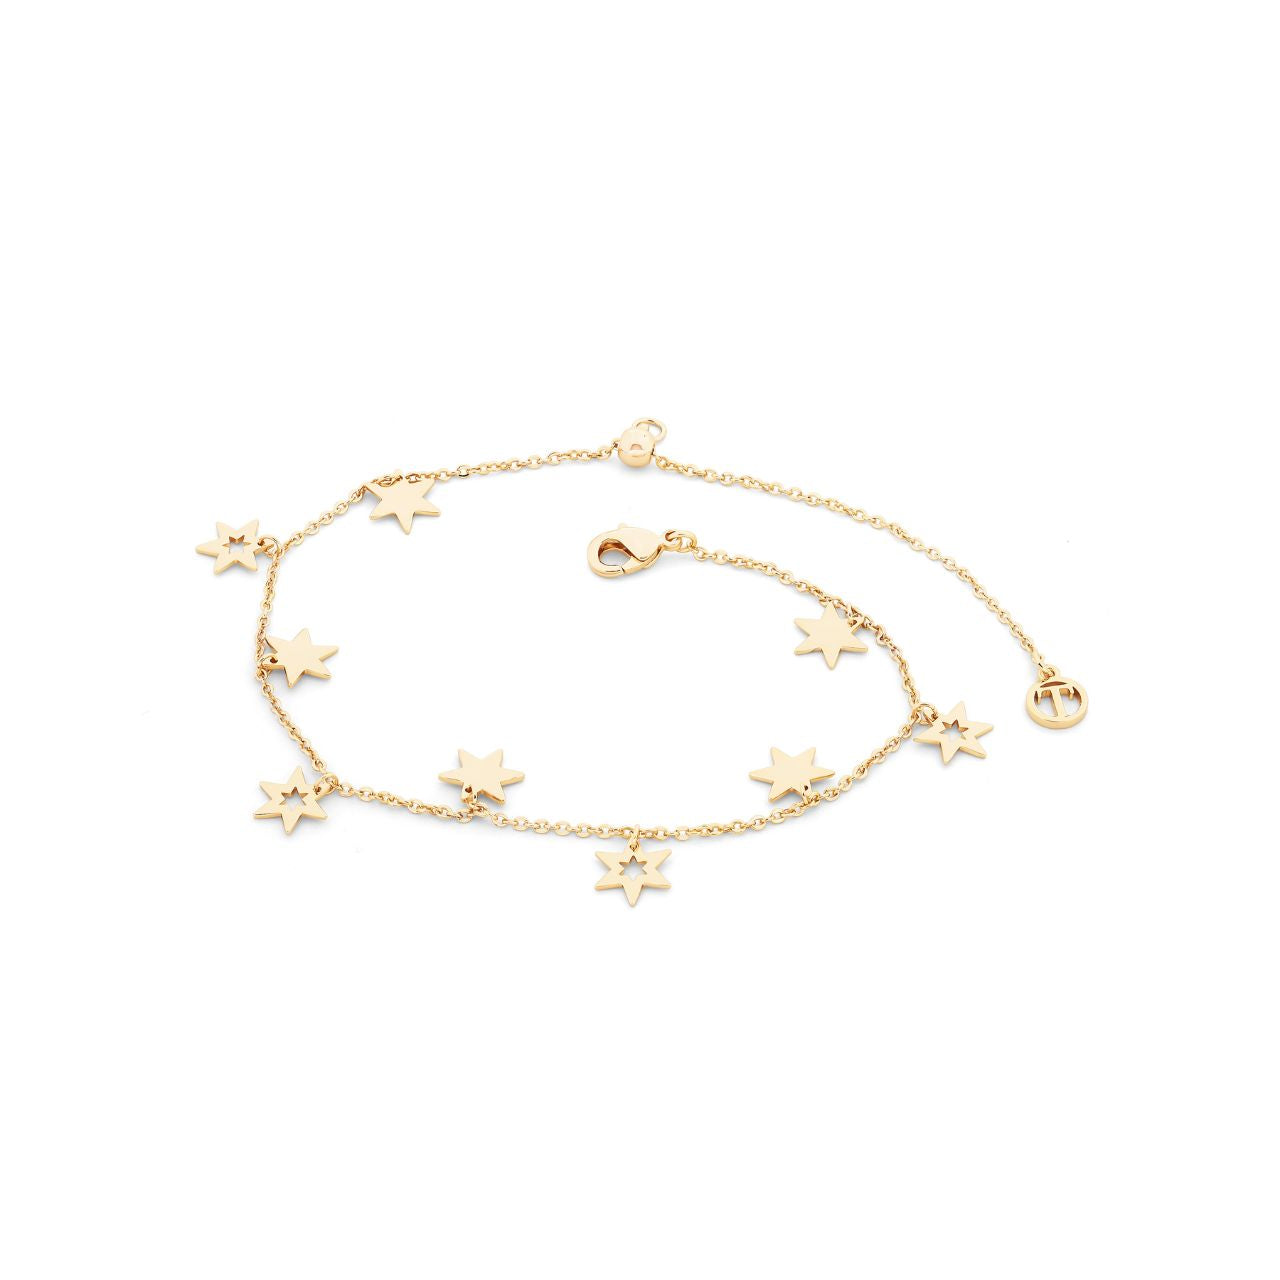 Experience the elegance and luxury of the Tipperary Nine Star Gold Bracelet, with a timeless design that's been crafted to perfection. This must-have accessory is a testament to our industry expertise and commitment to providing the highest quality products.